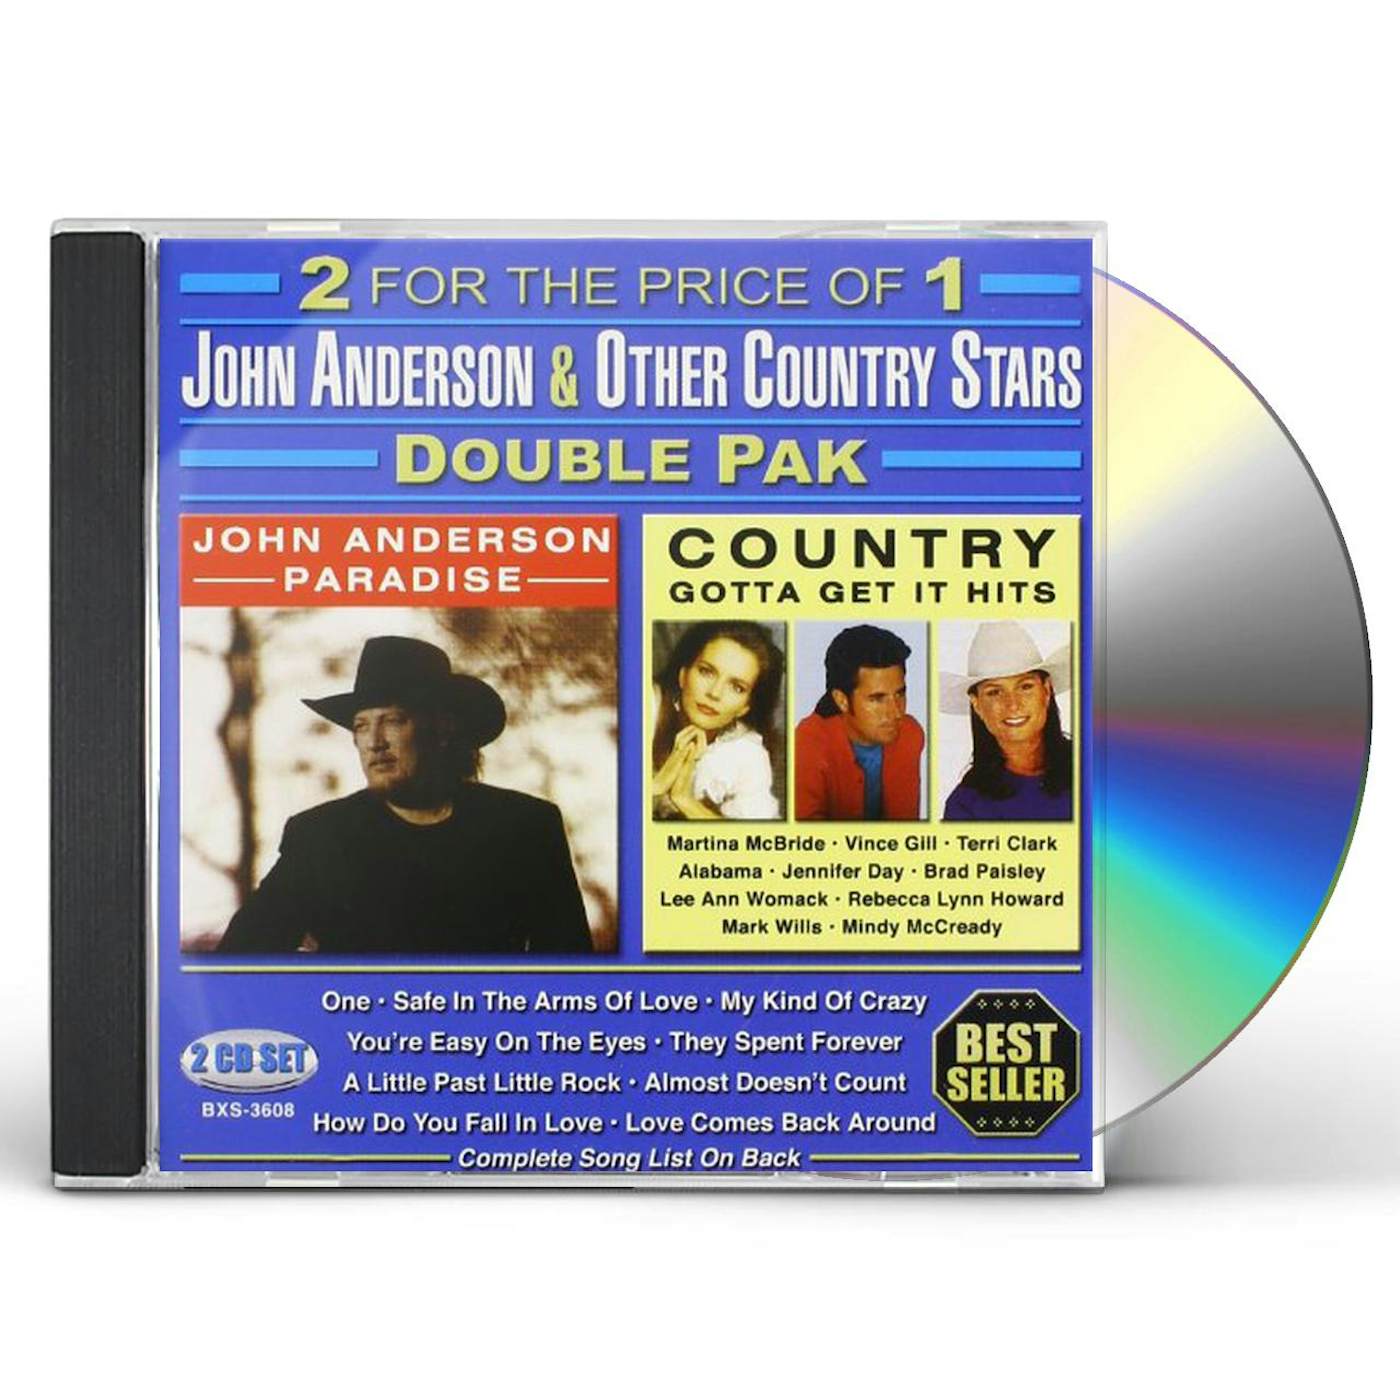 JOHN ANDERSON & OTHER COUNTRY STARS CD